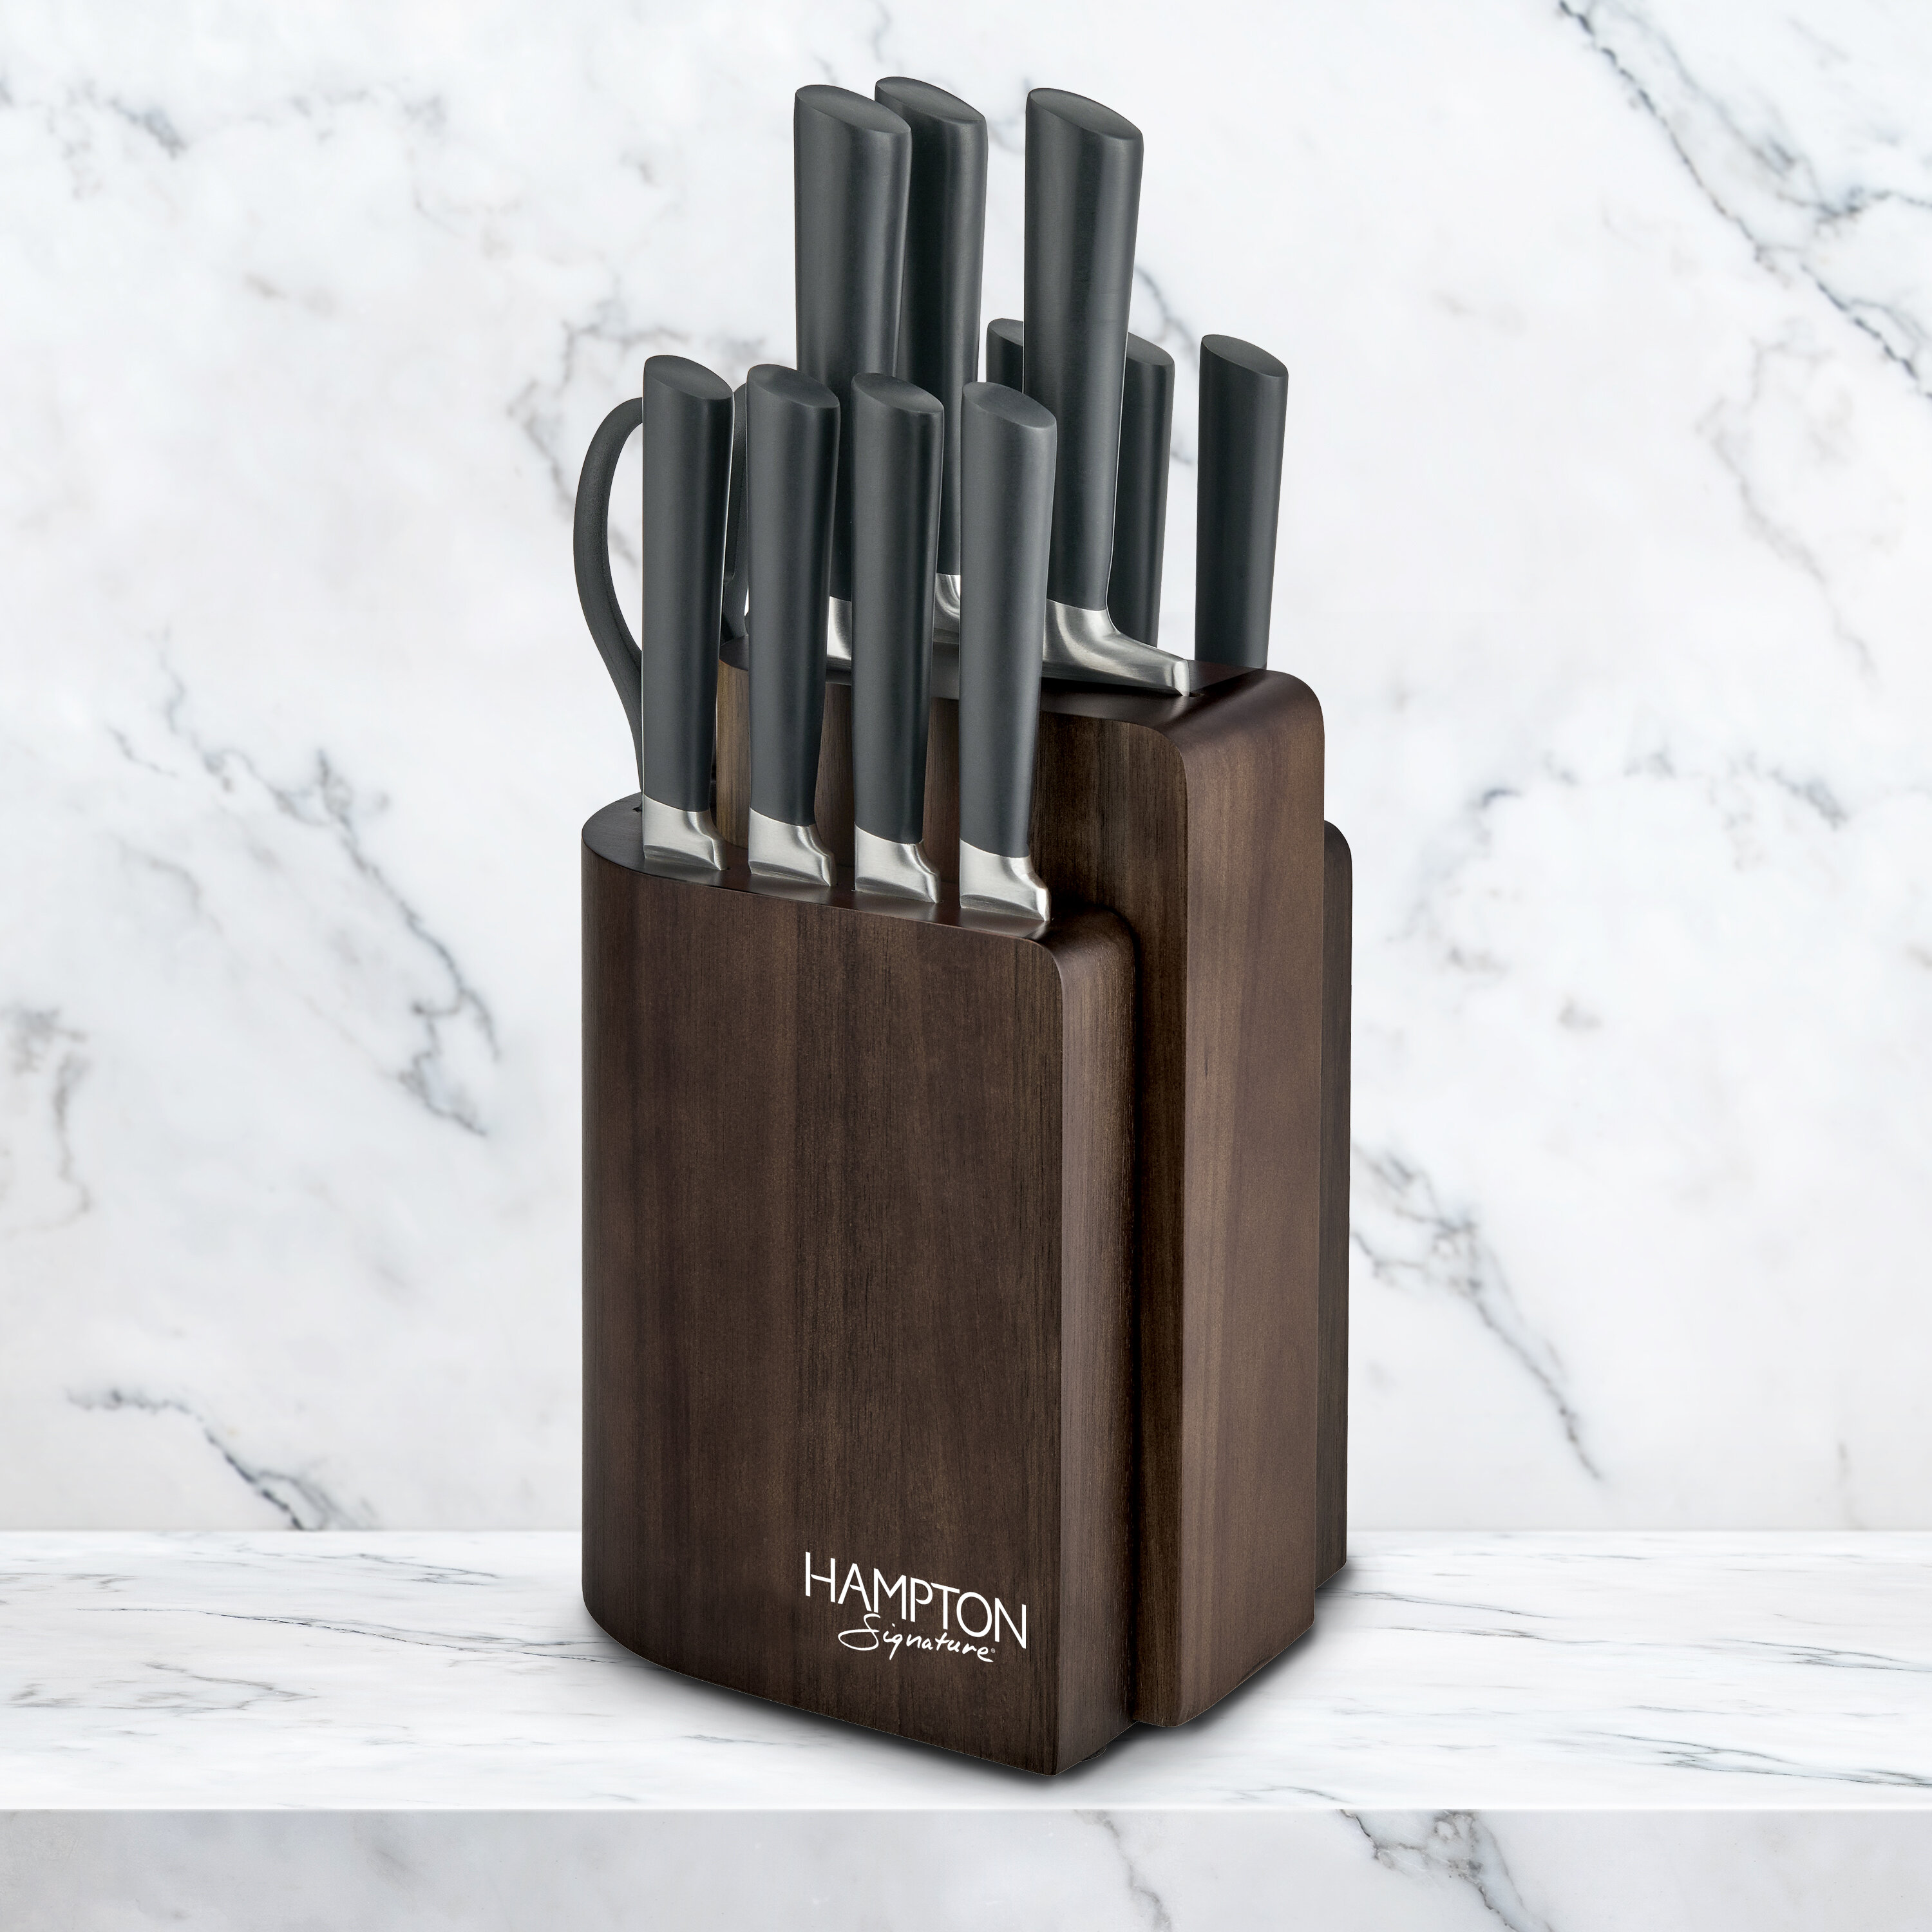 Signature Set with Steak Knives with Block